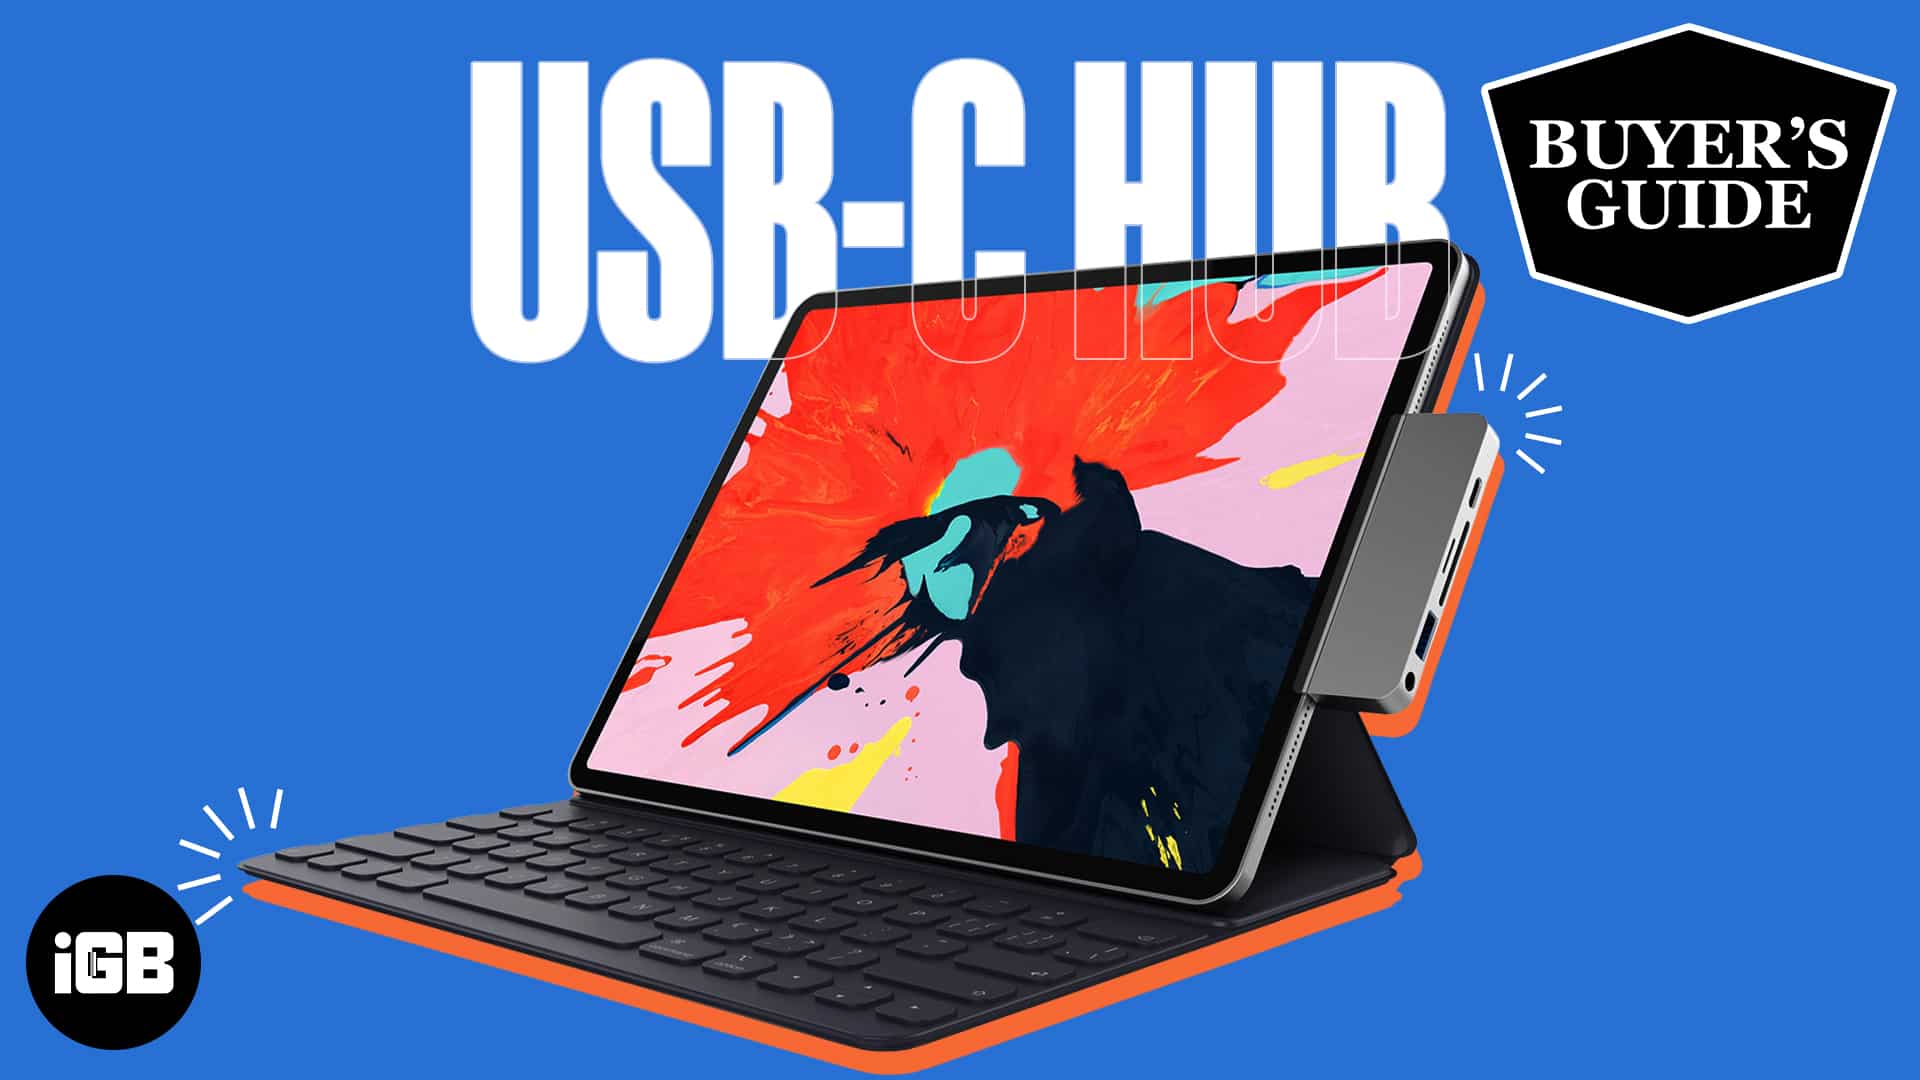 Best usb c hubs and docking stations for ipad pro